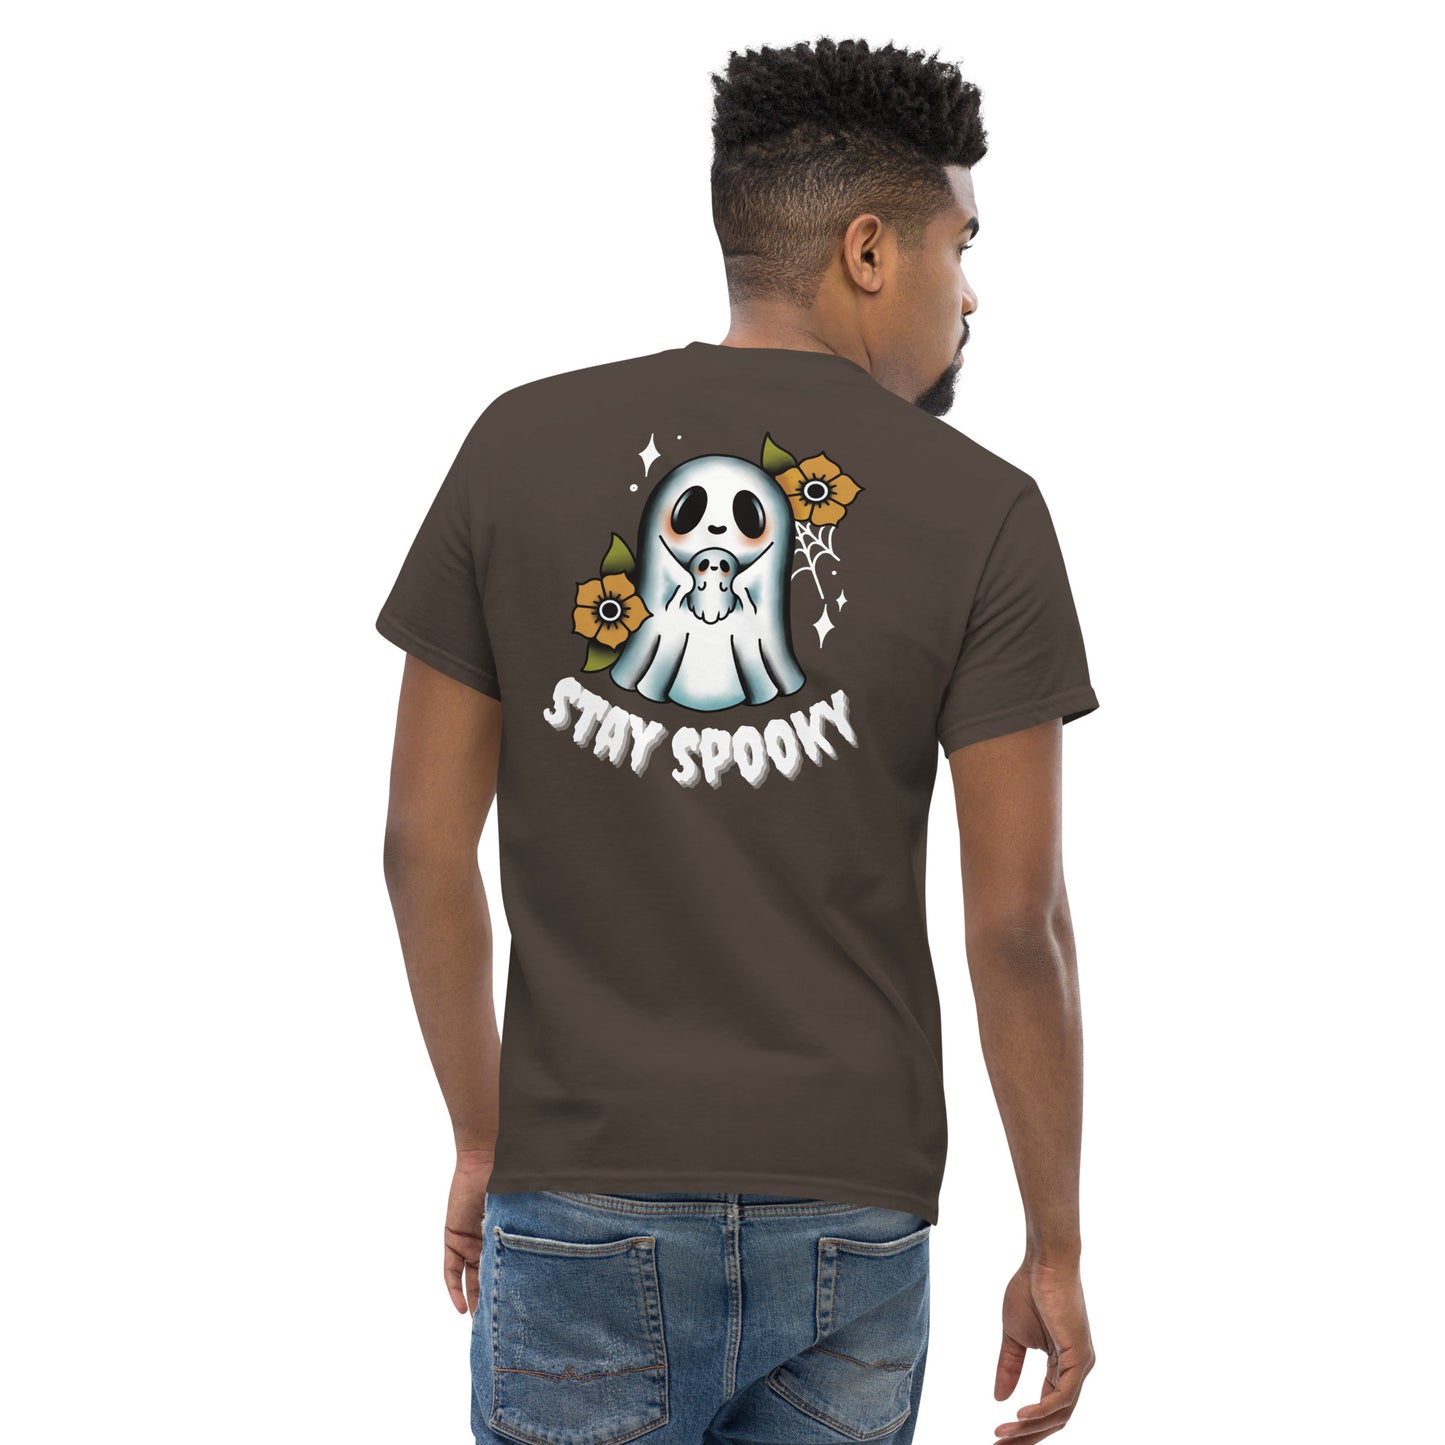 Stay Spooky classic tee